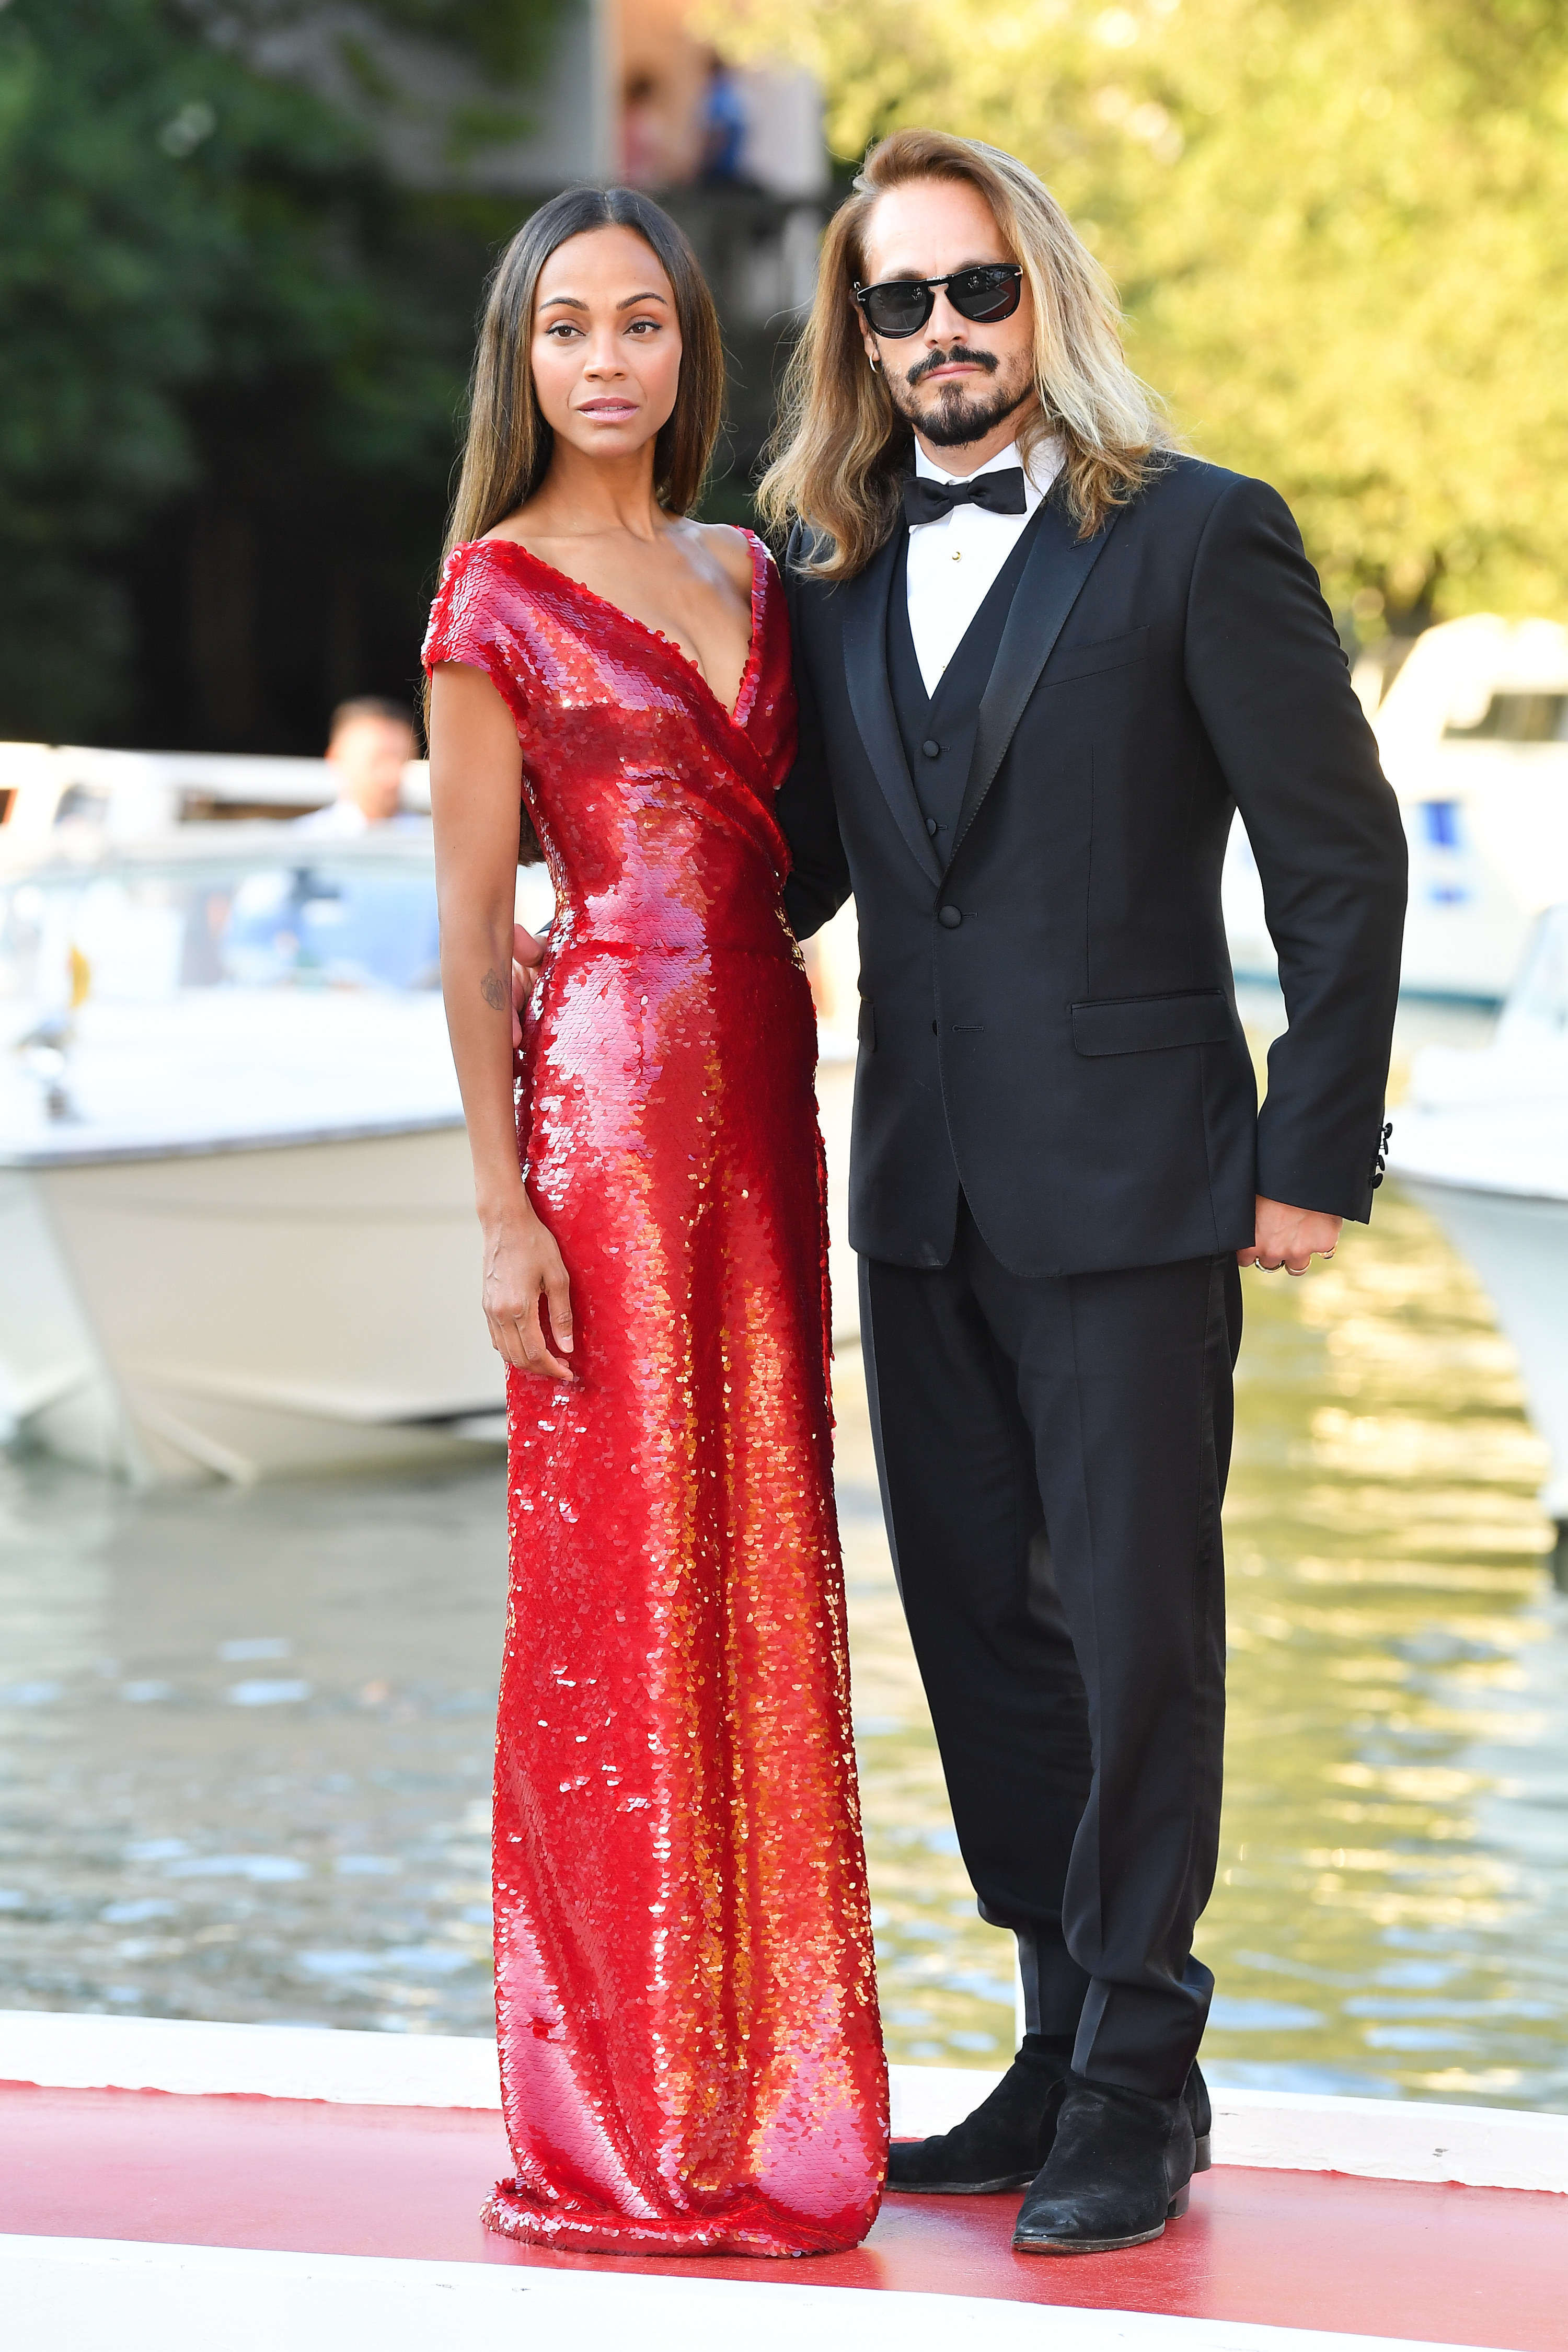 Zoe, wearing a long sequined gown, and Marco, wearing a tux, pose for photographers at an event. with boats behind them